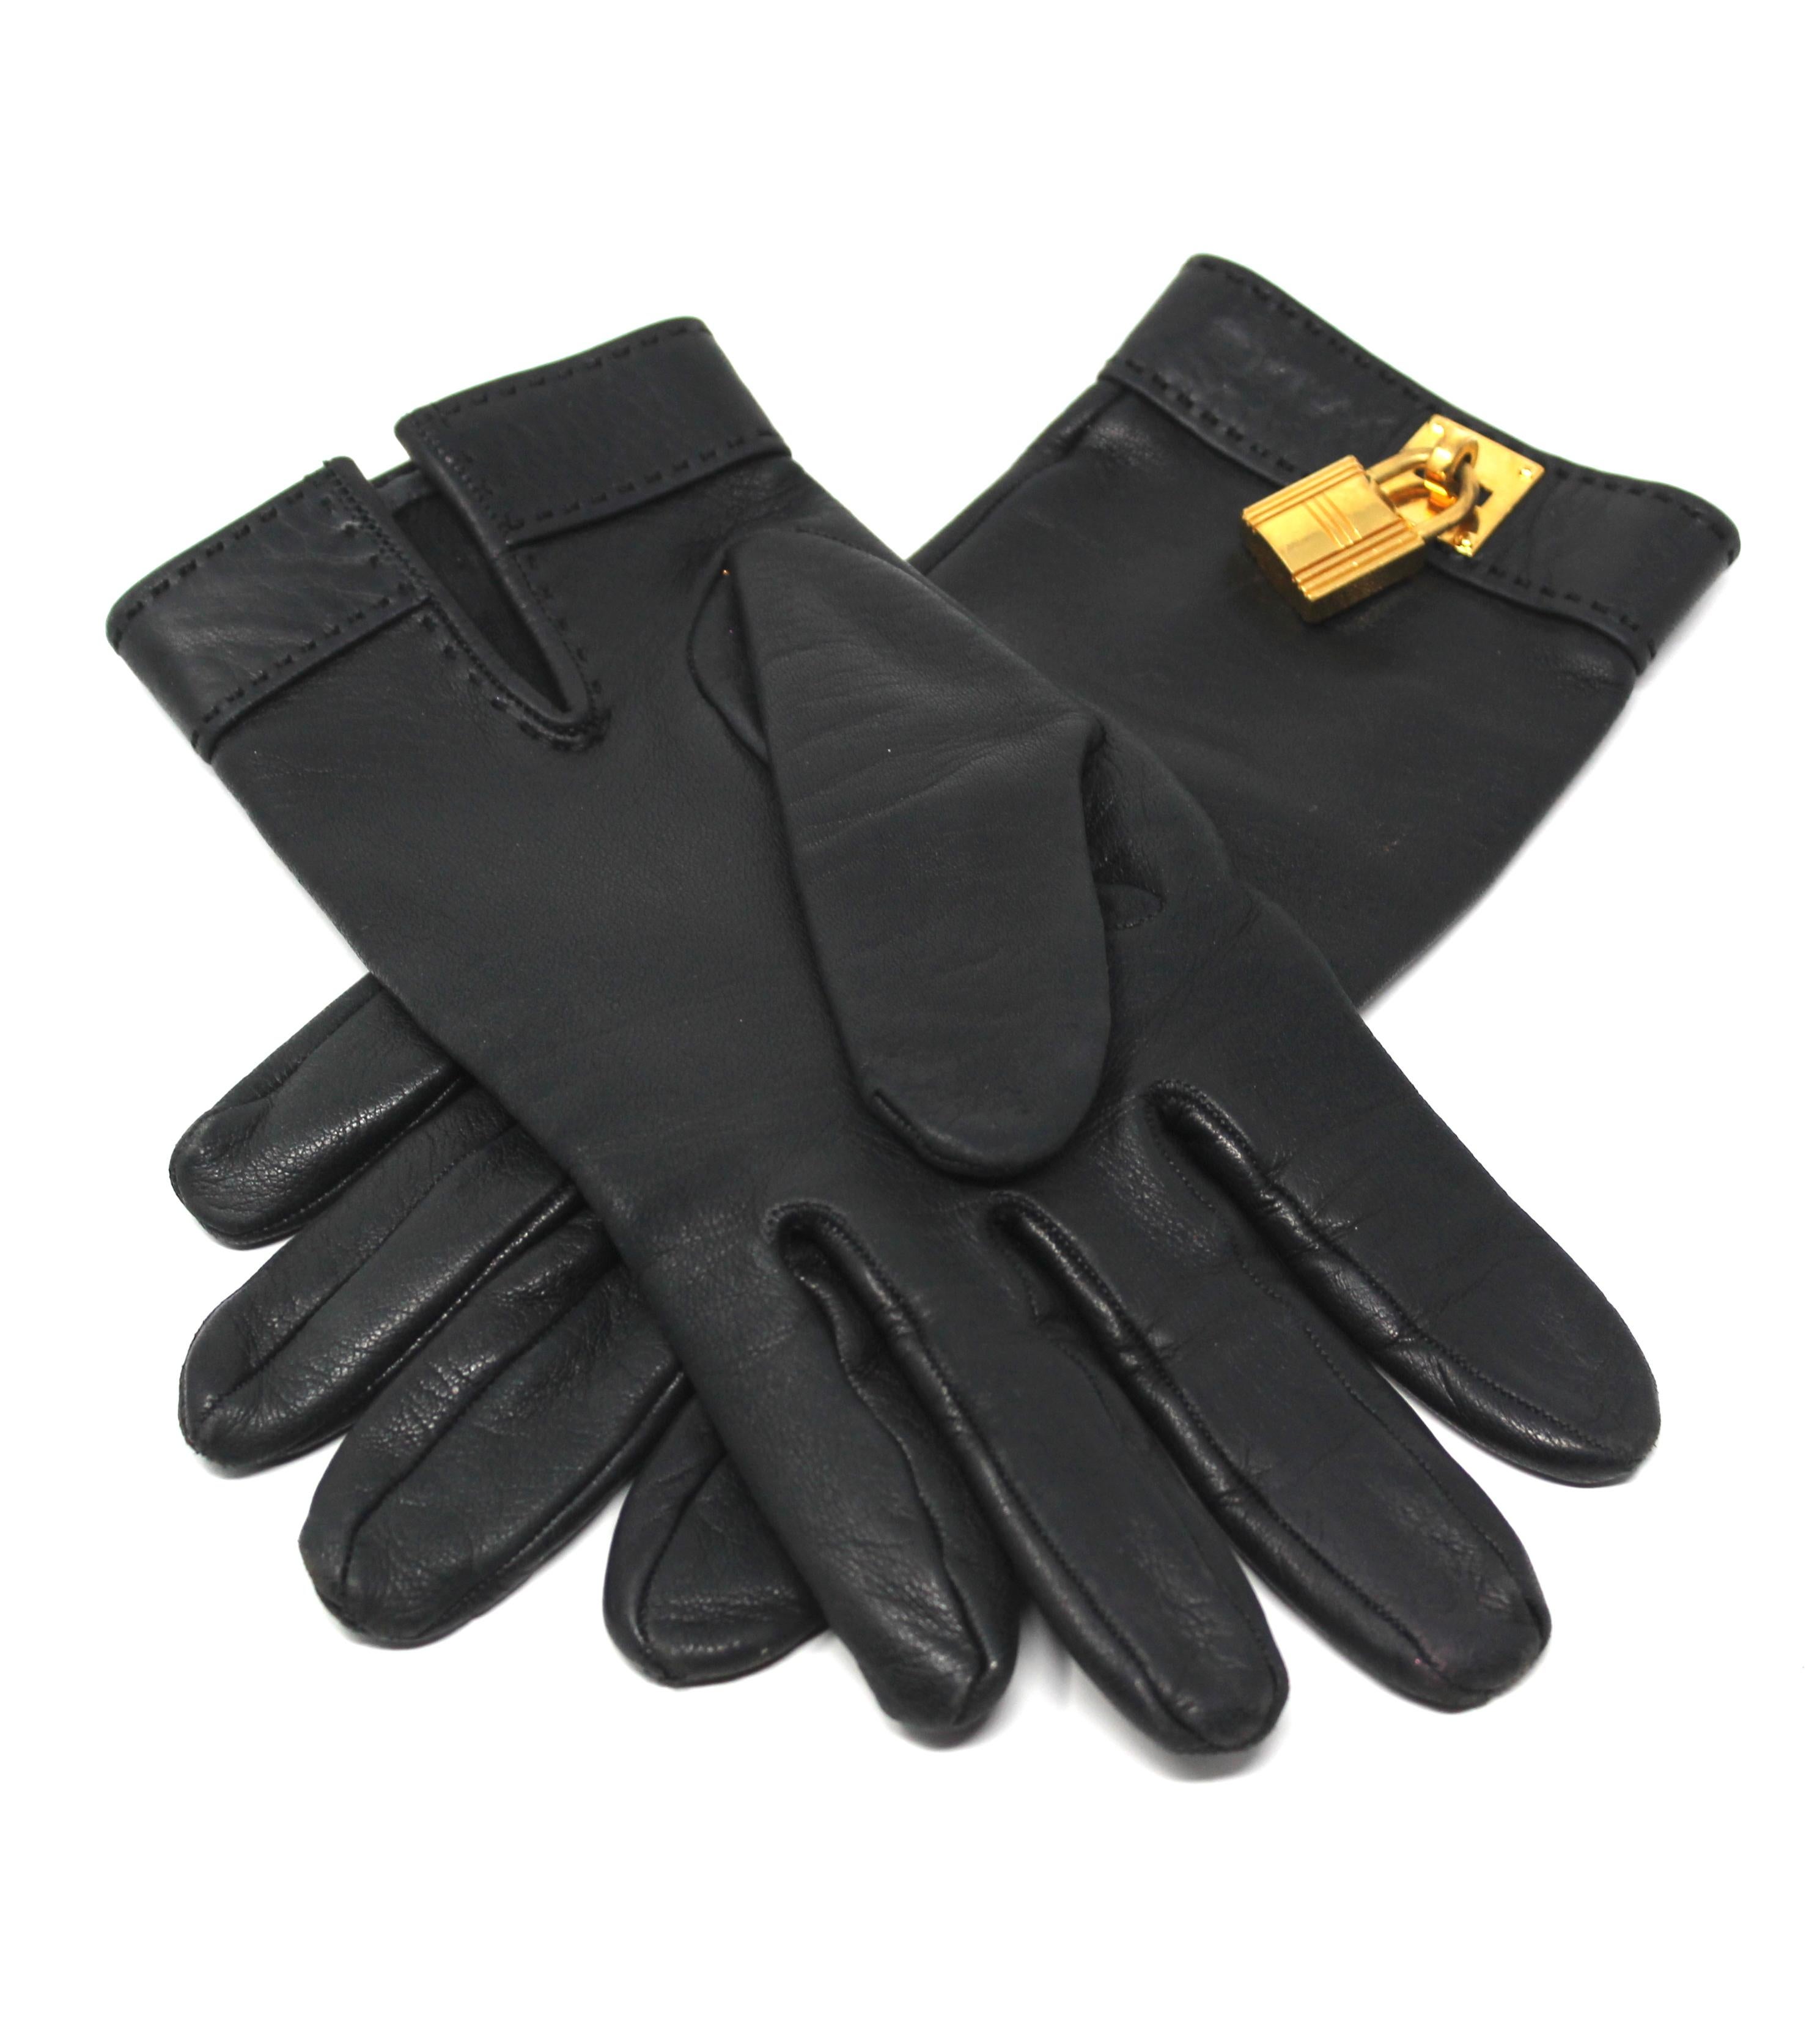 -Hermès driving lambskin gloves 
-Gold padlock on each glove, signed
-Size 7, will fit a size M
-Has Hermès stamp on the right glove, although it's a bit faded

Approximate Measurements
-Total length:  8.5